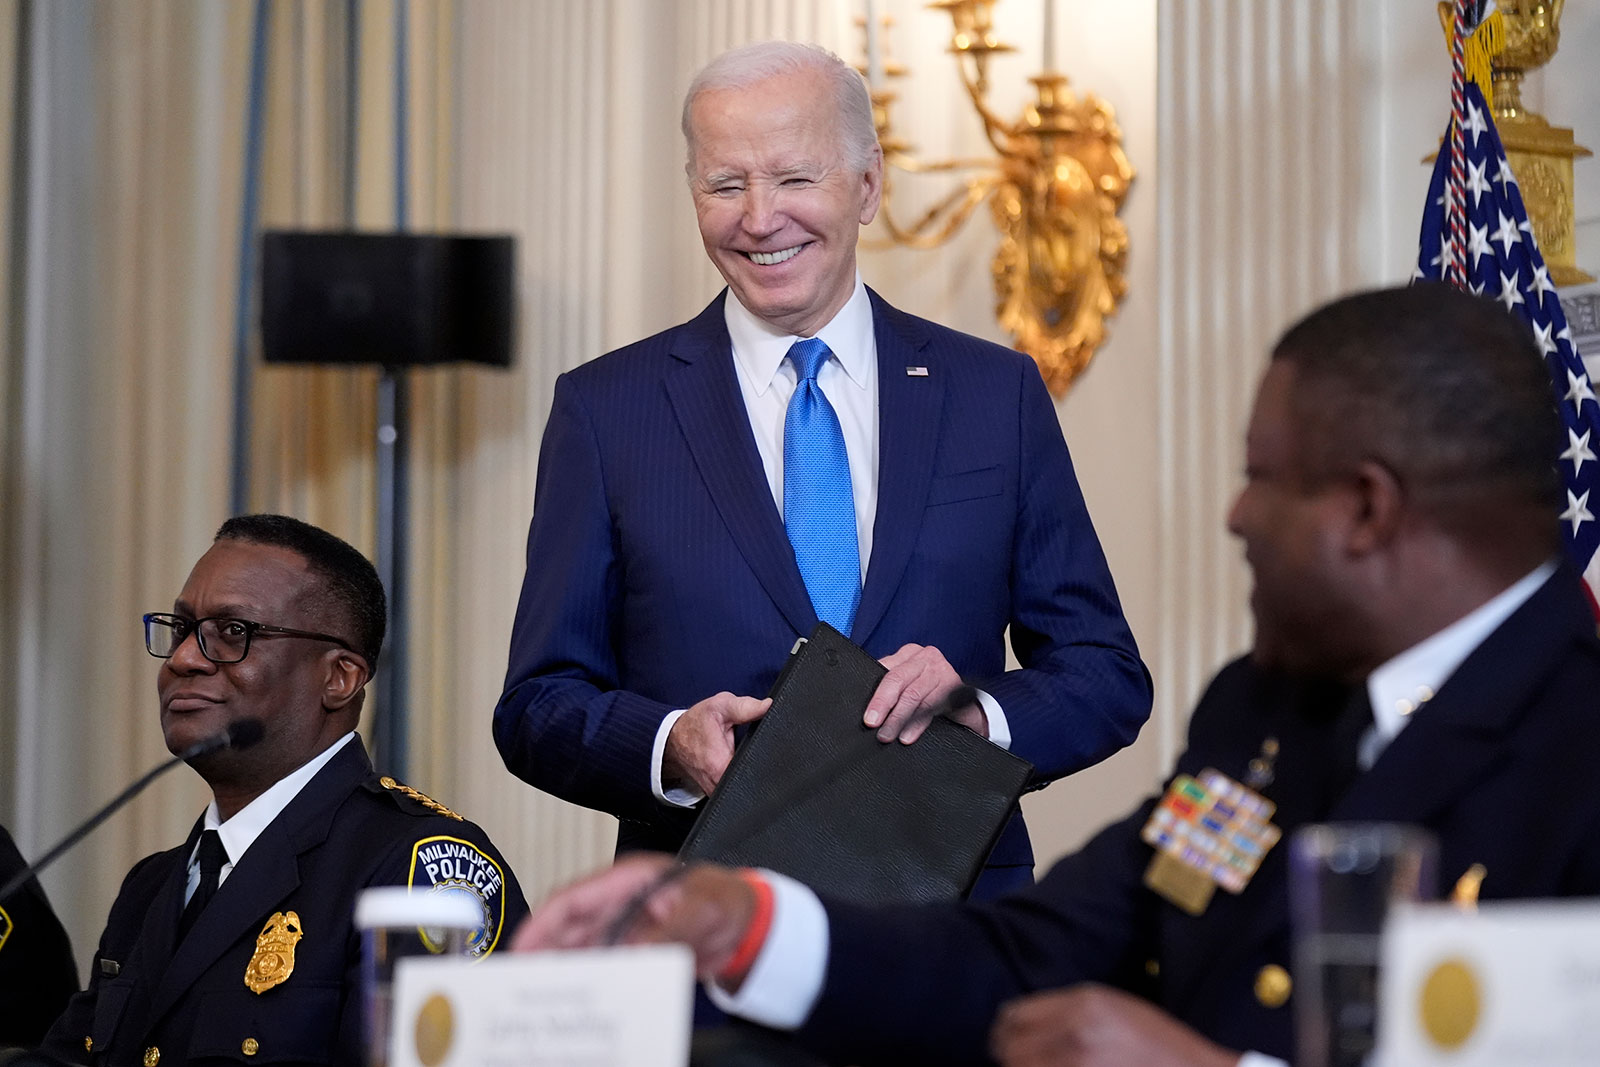 President Joe Biden smiles as he meets with law enforcement officials at the White House on Wednesday, February, 28. 